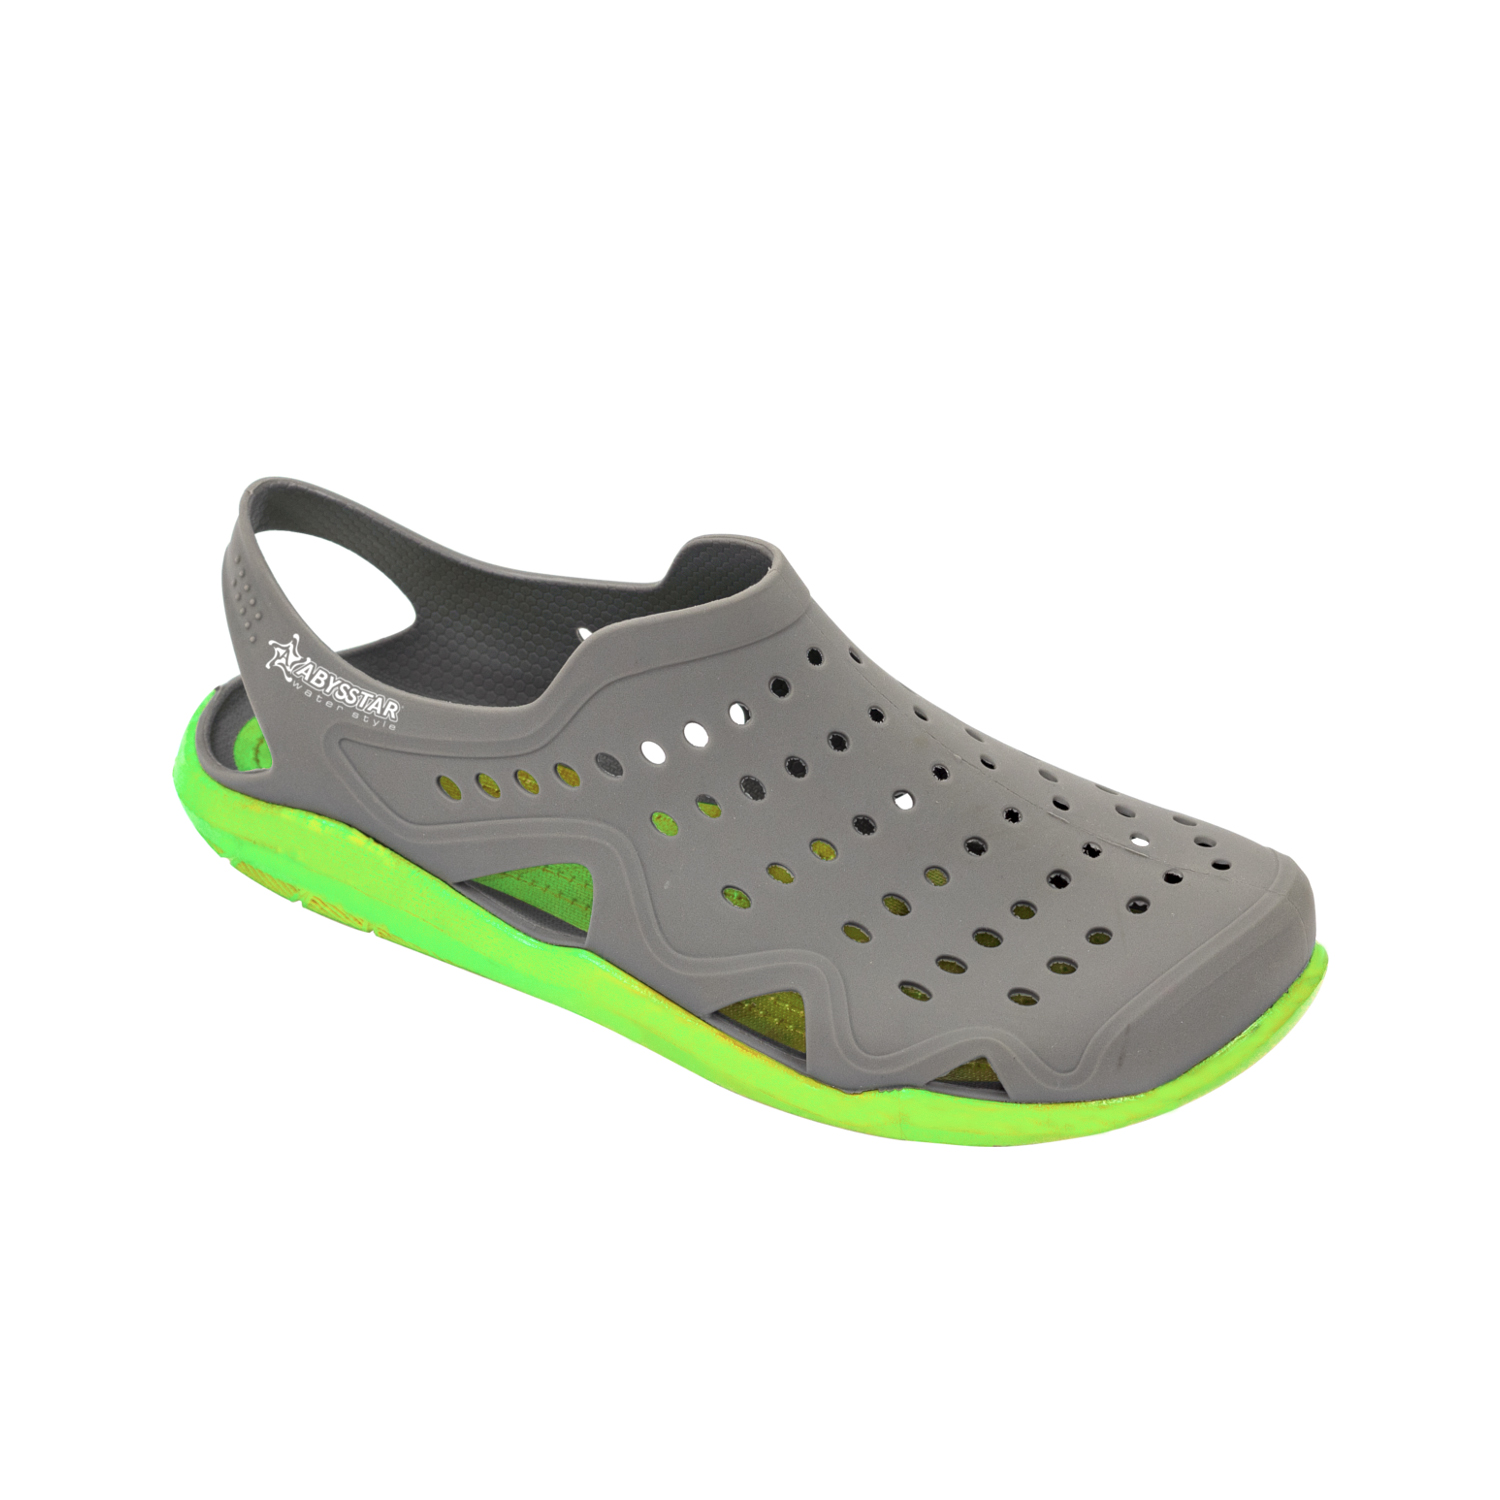 Abysstar Creta ThermoRubber Shoes - Spearfishing UK